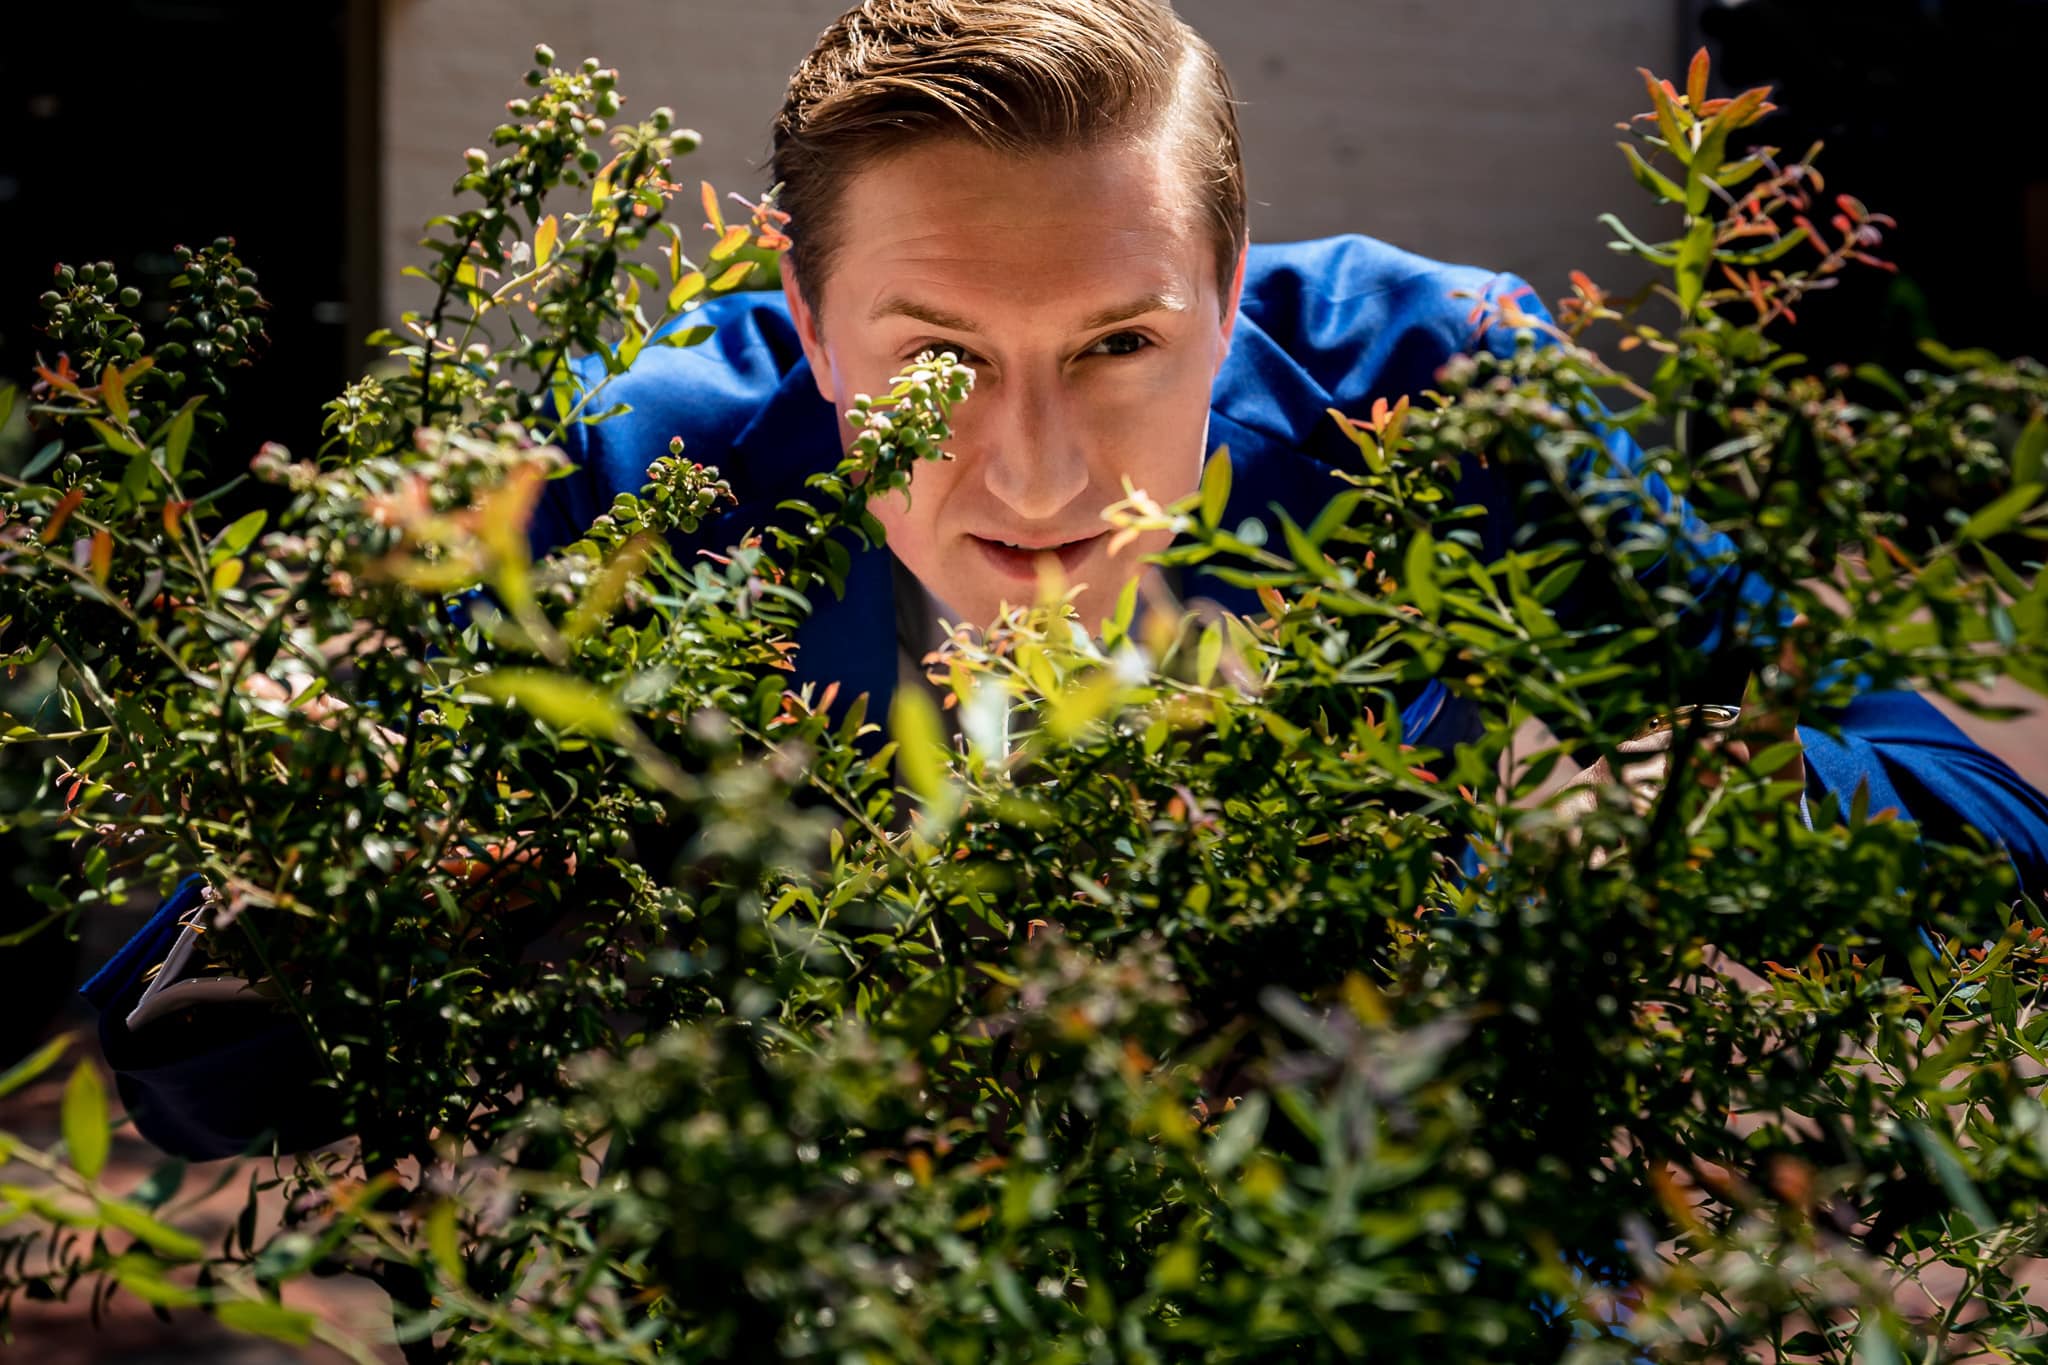 groom "hides" behind a bush after suggesting he jump out to scare the bride for the first look | photo by Kivus & Camera